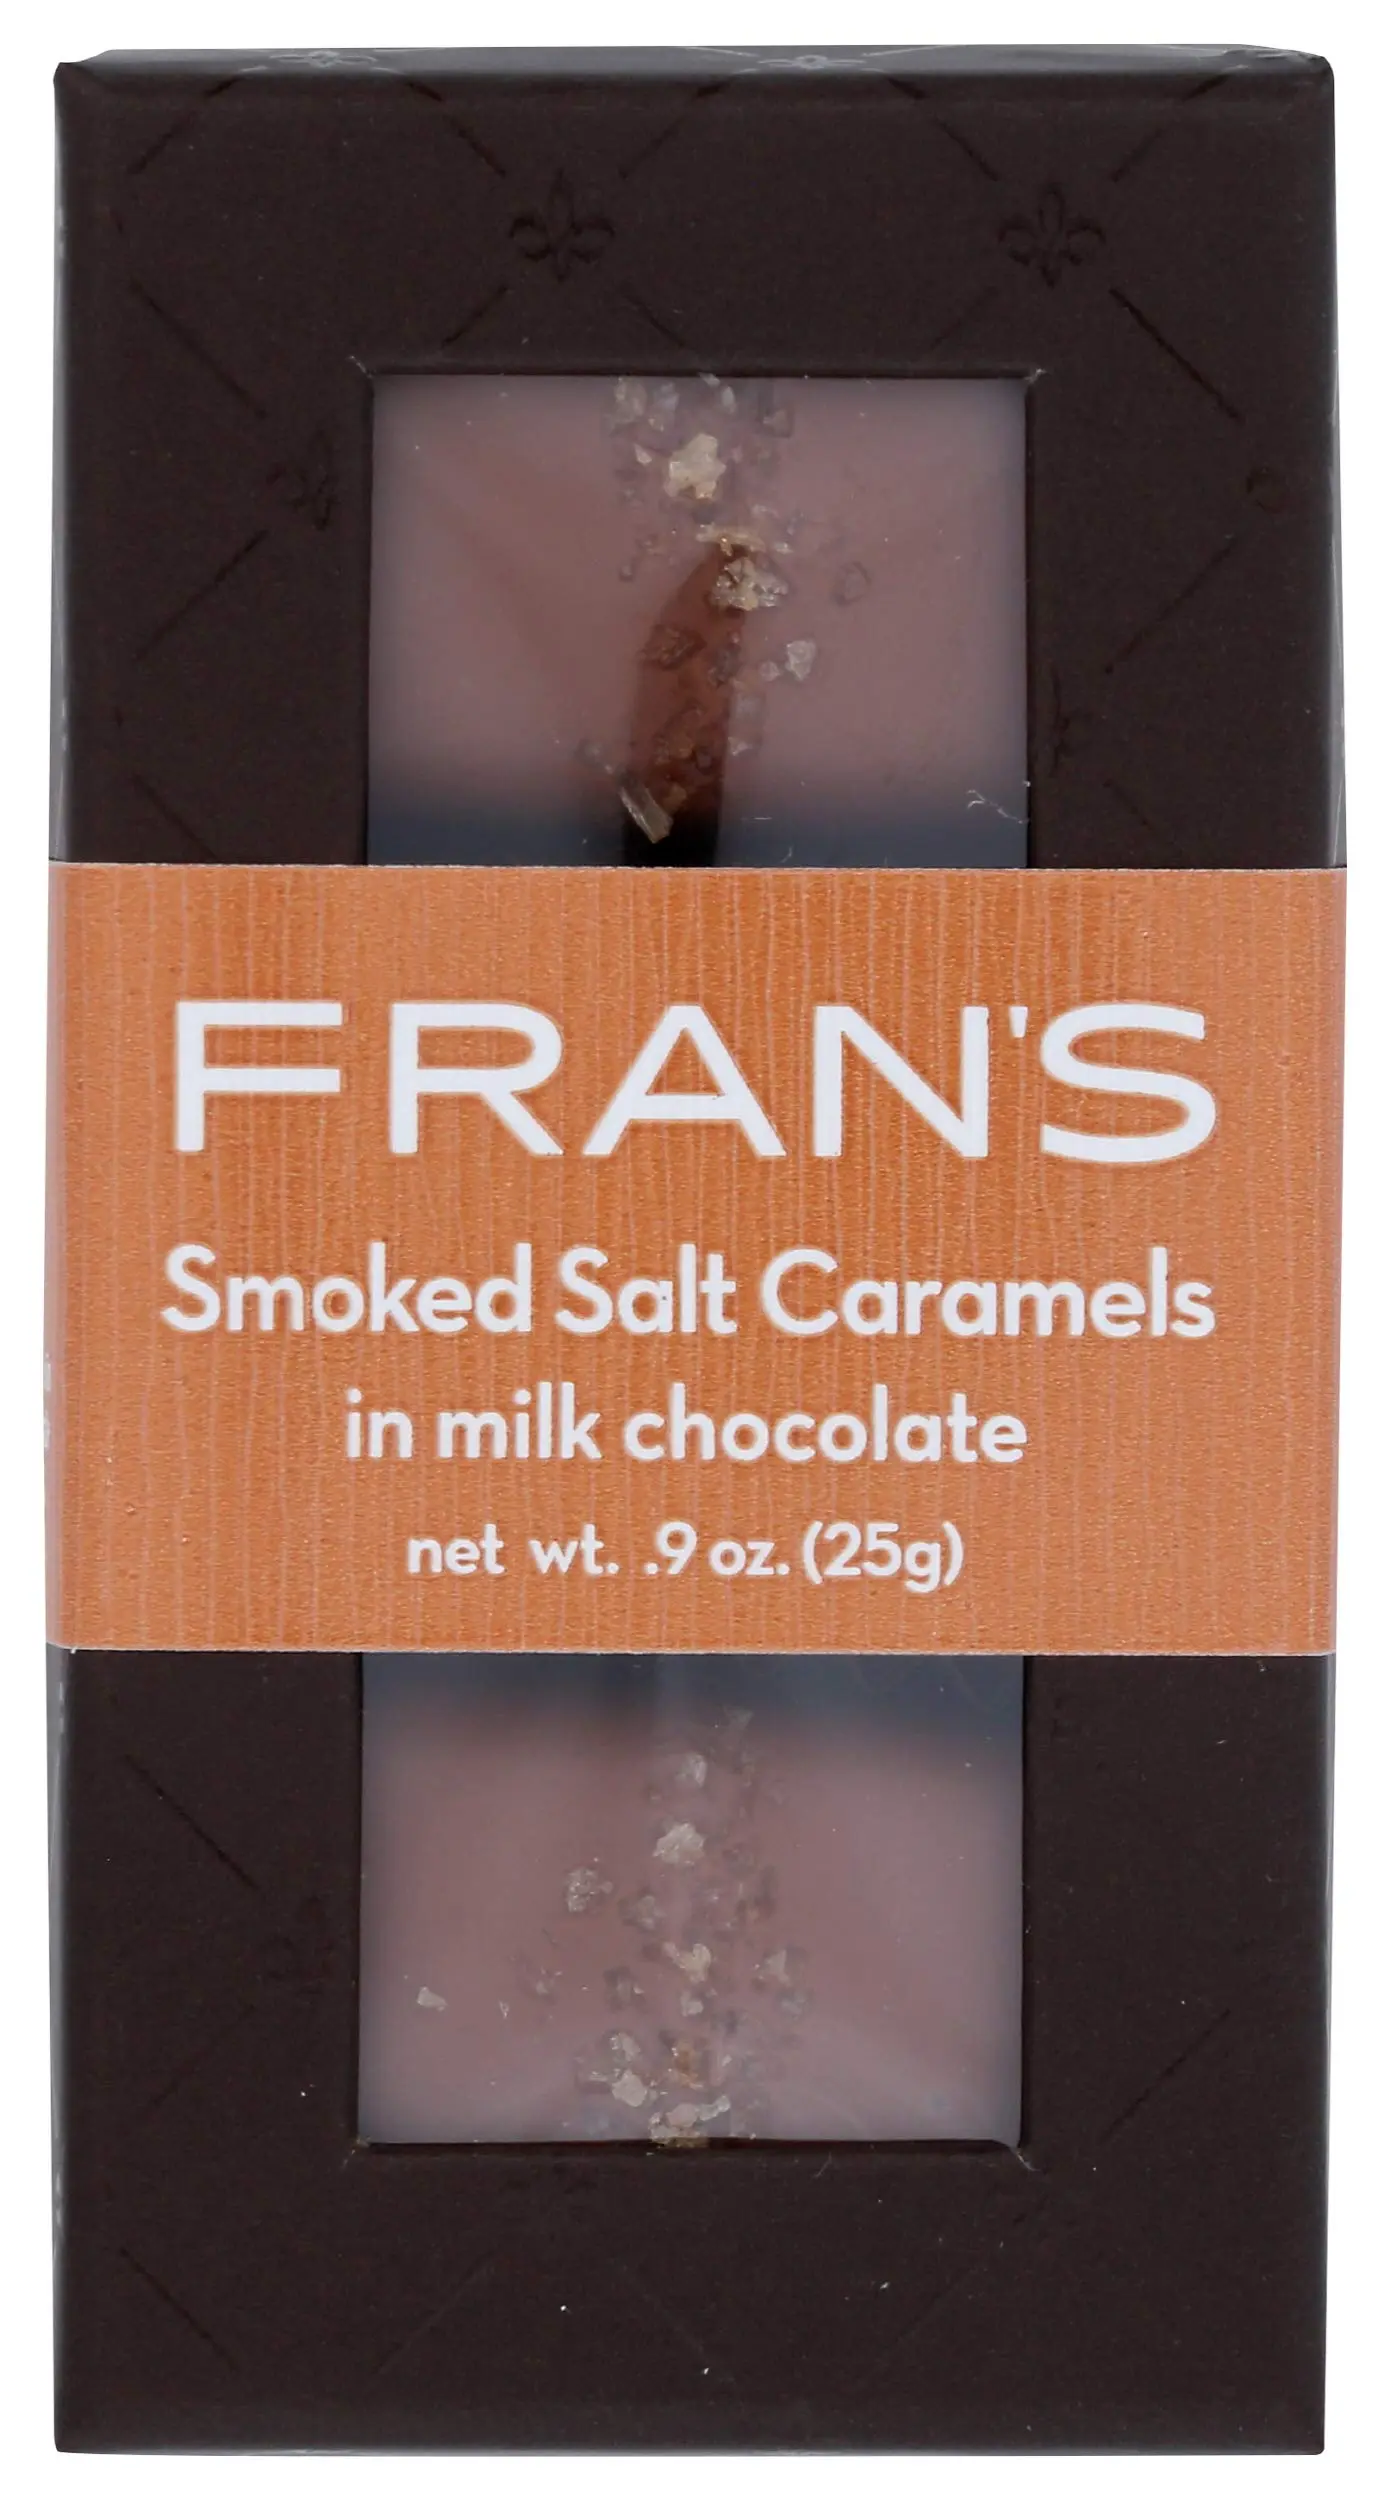 fran's smoked salt caramels - What are the ingredients in Frans caramel sauce